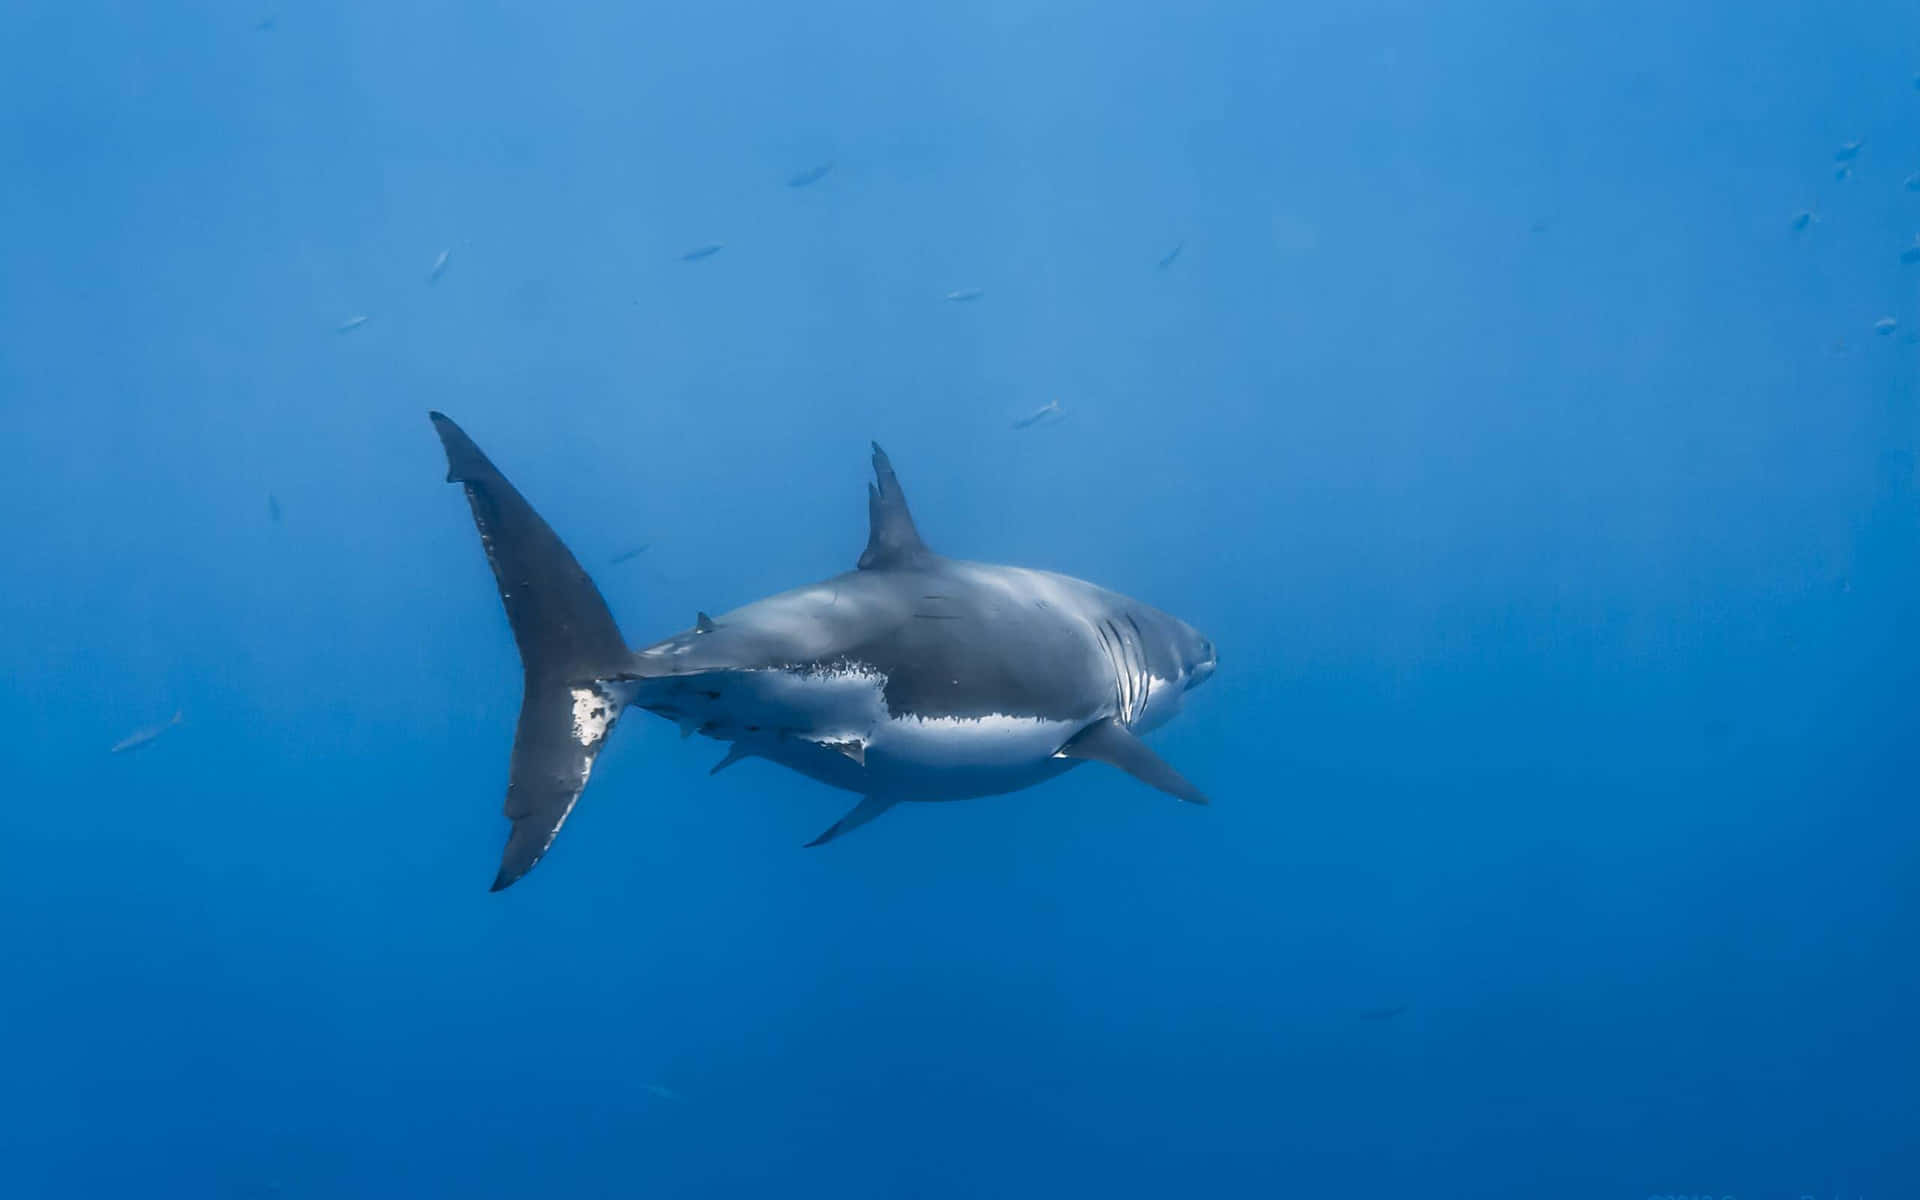 A Great White Shark swims near the surface of the ocean